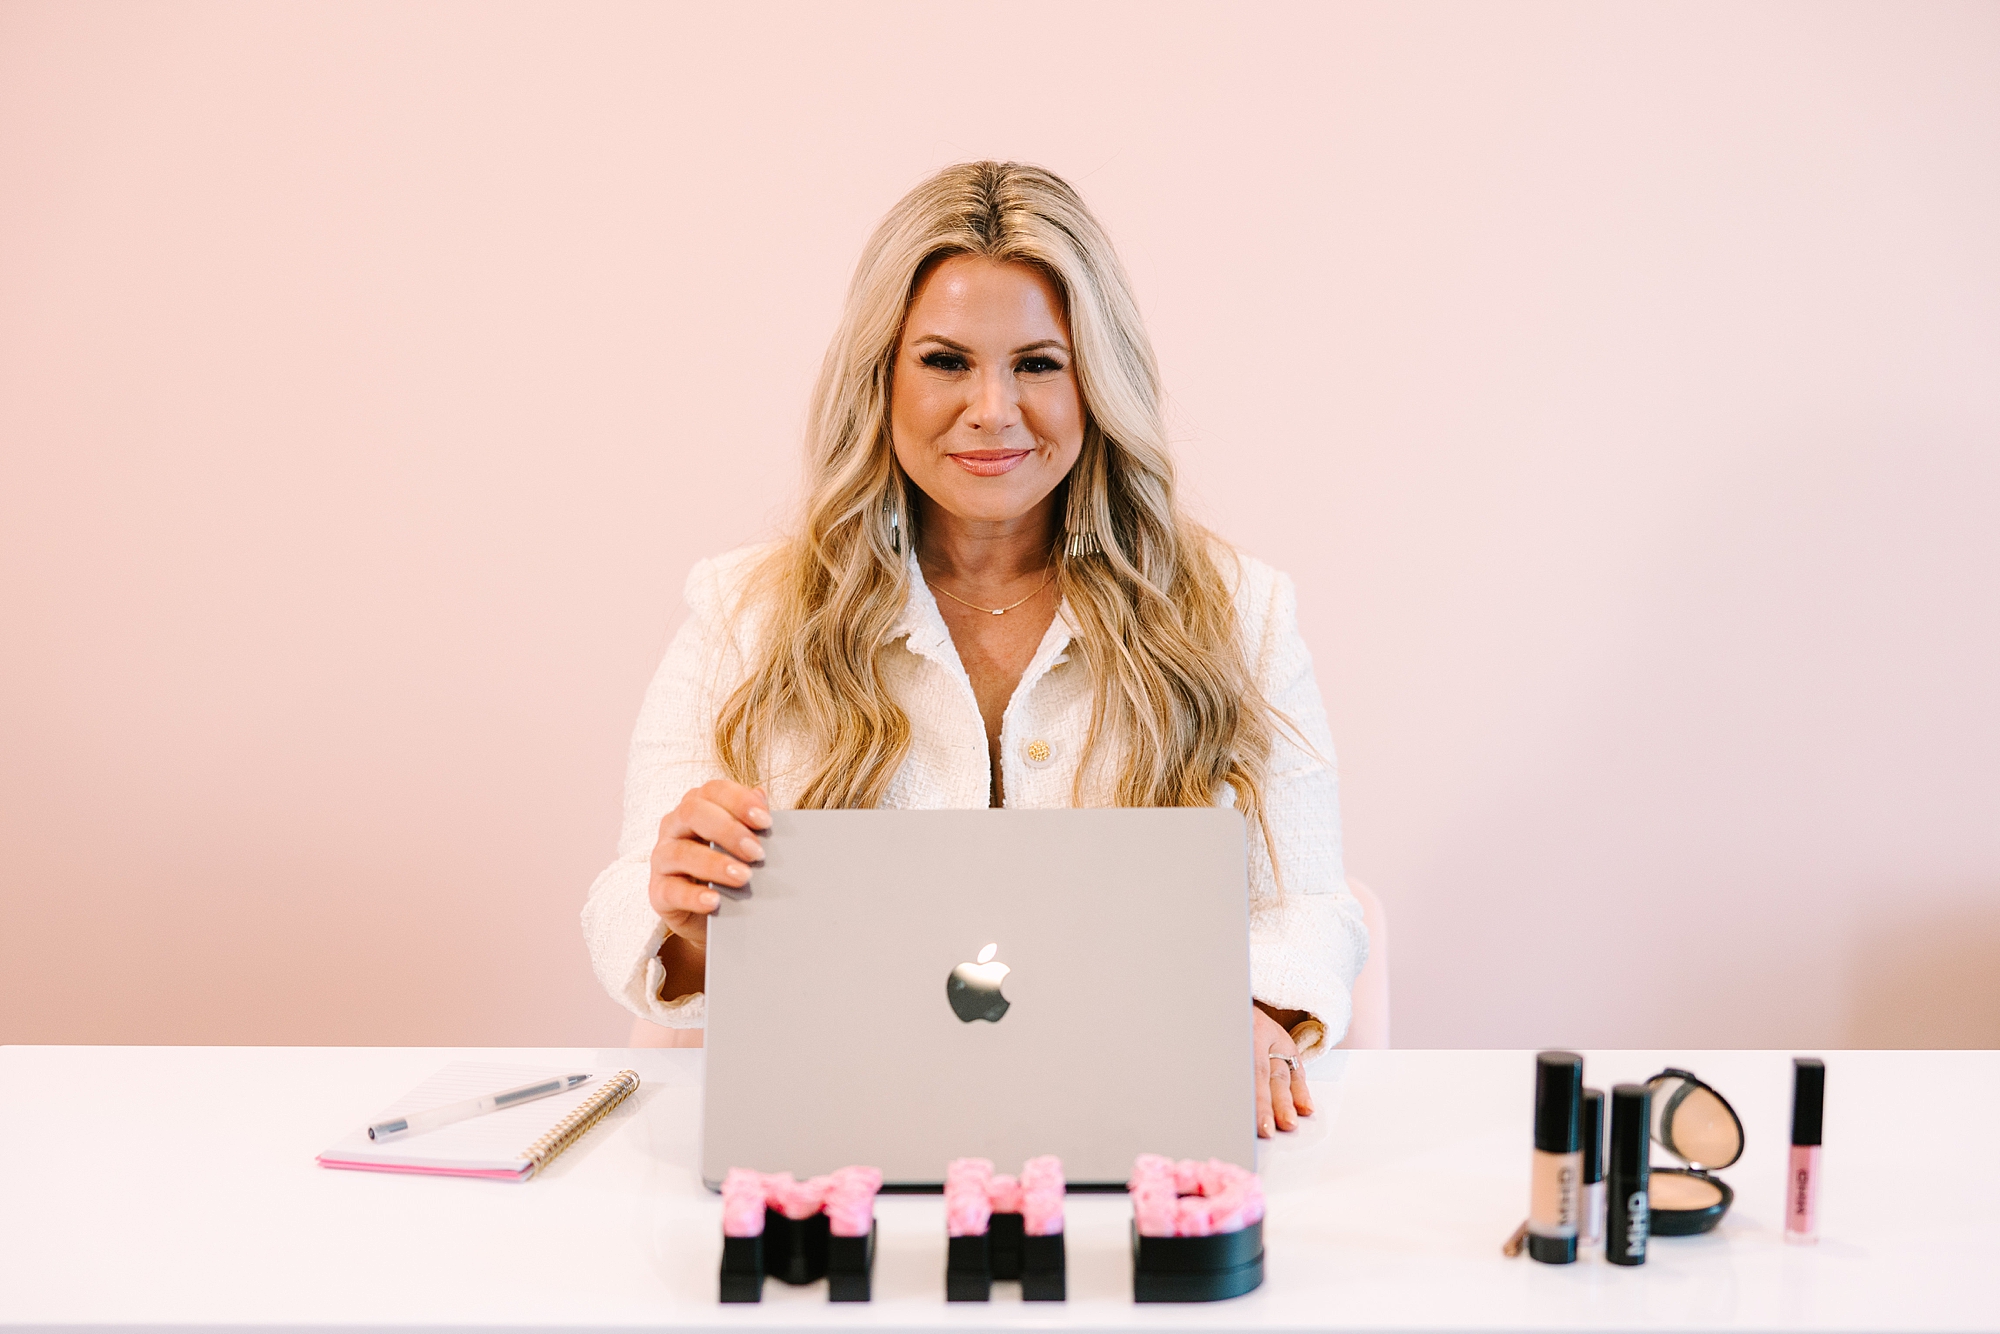 woman sits with laptop and makeup products on desk